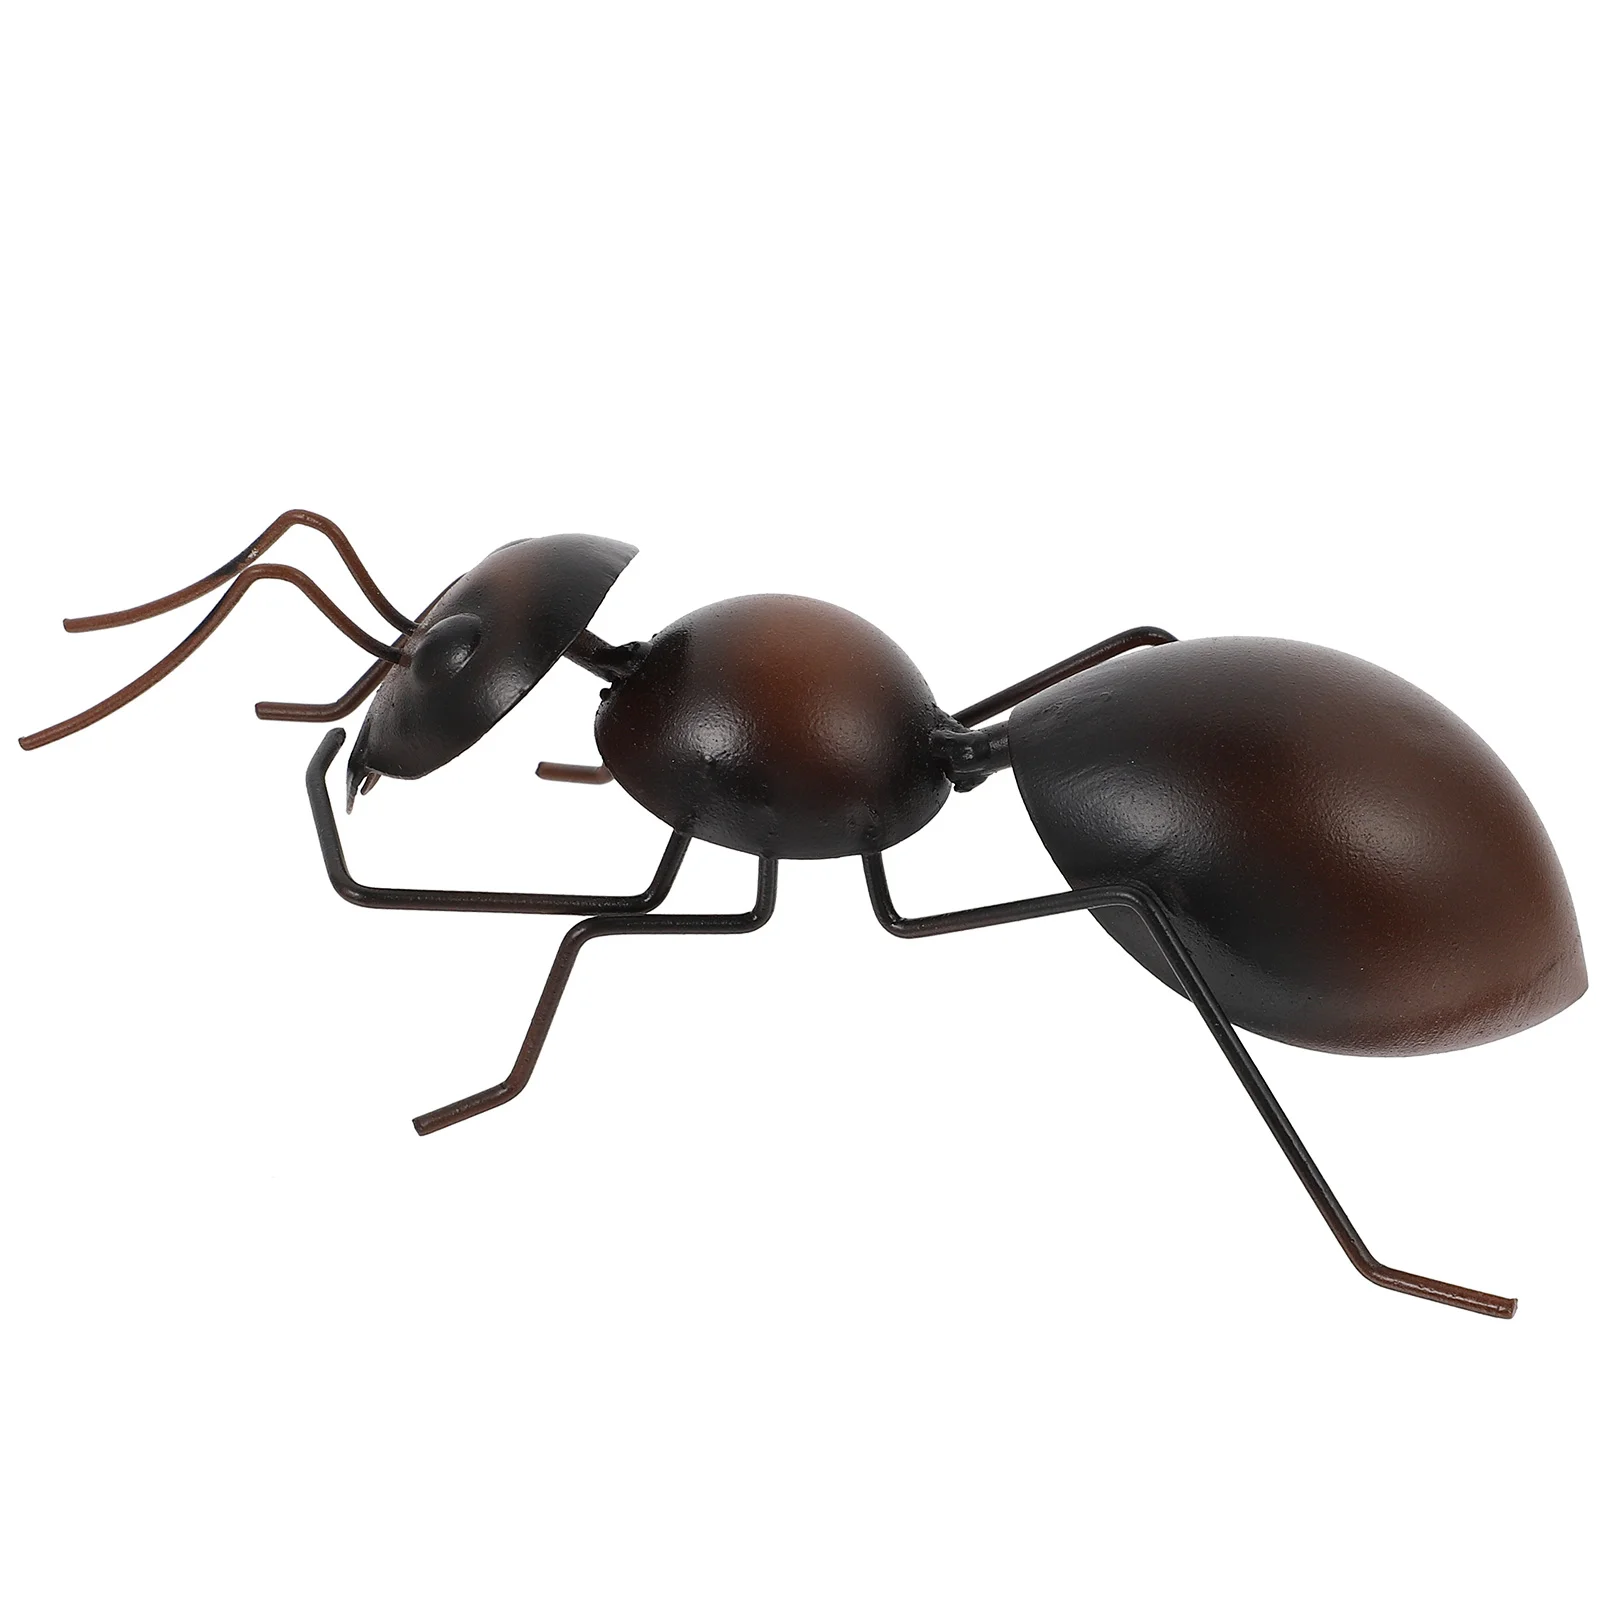 

Metal Iron Ant Balcony Ants Ornament Decor House Decorations Home Garden Adornment Dining Room Table Desktop Decorative Wall